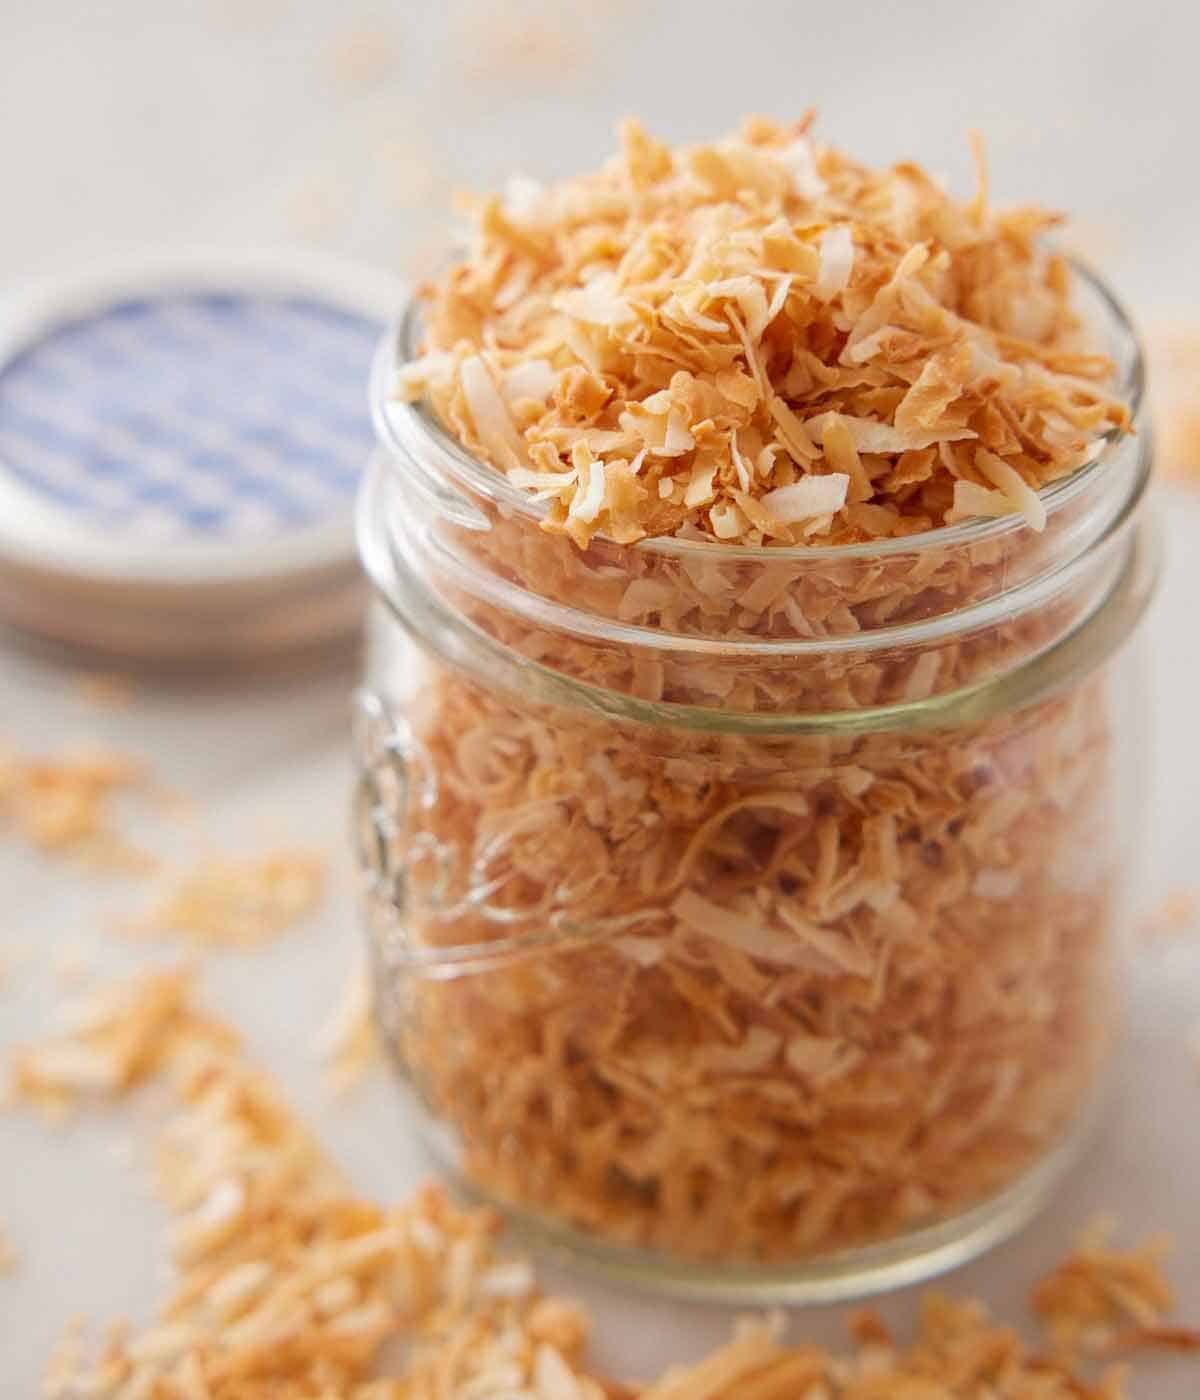 A close up view of a mason jar of toasted coconut.